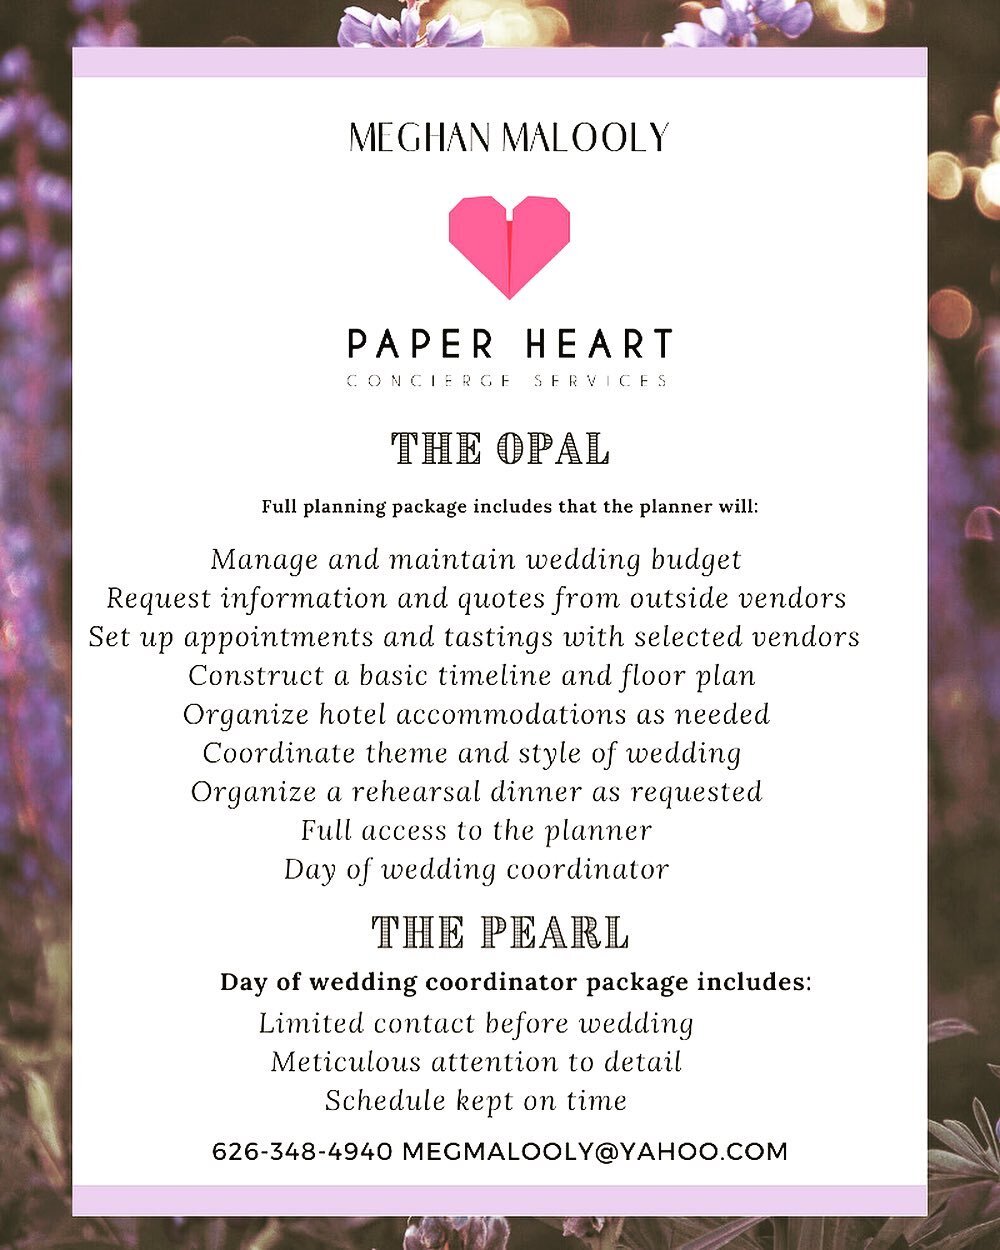 It&rsquo;s time! I am so proud and happy to introduce wedding/event planning as a part of my business! If you need a planner or day of wedding coordinator please keep me in mind! #eventplanning #paperheartconceirgeservices #selfemployed